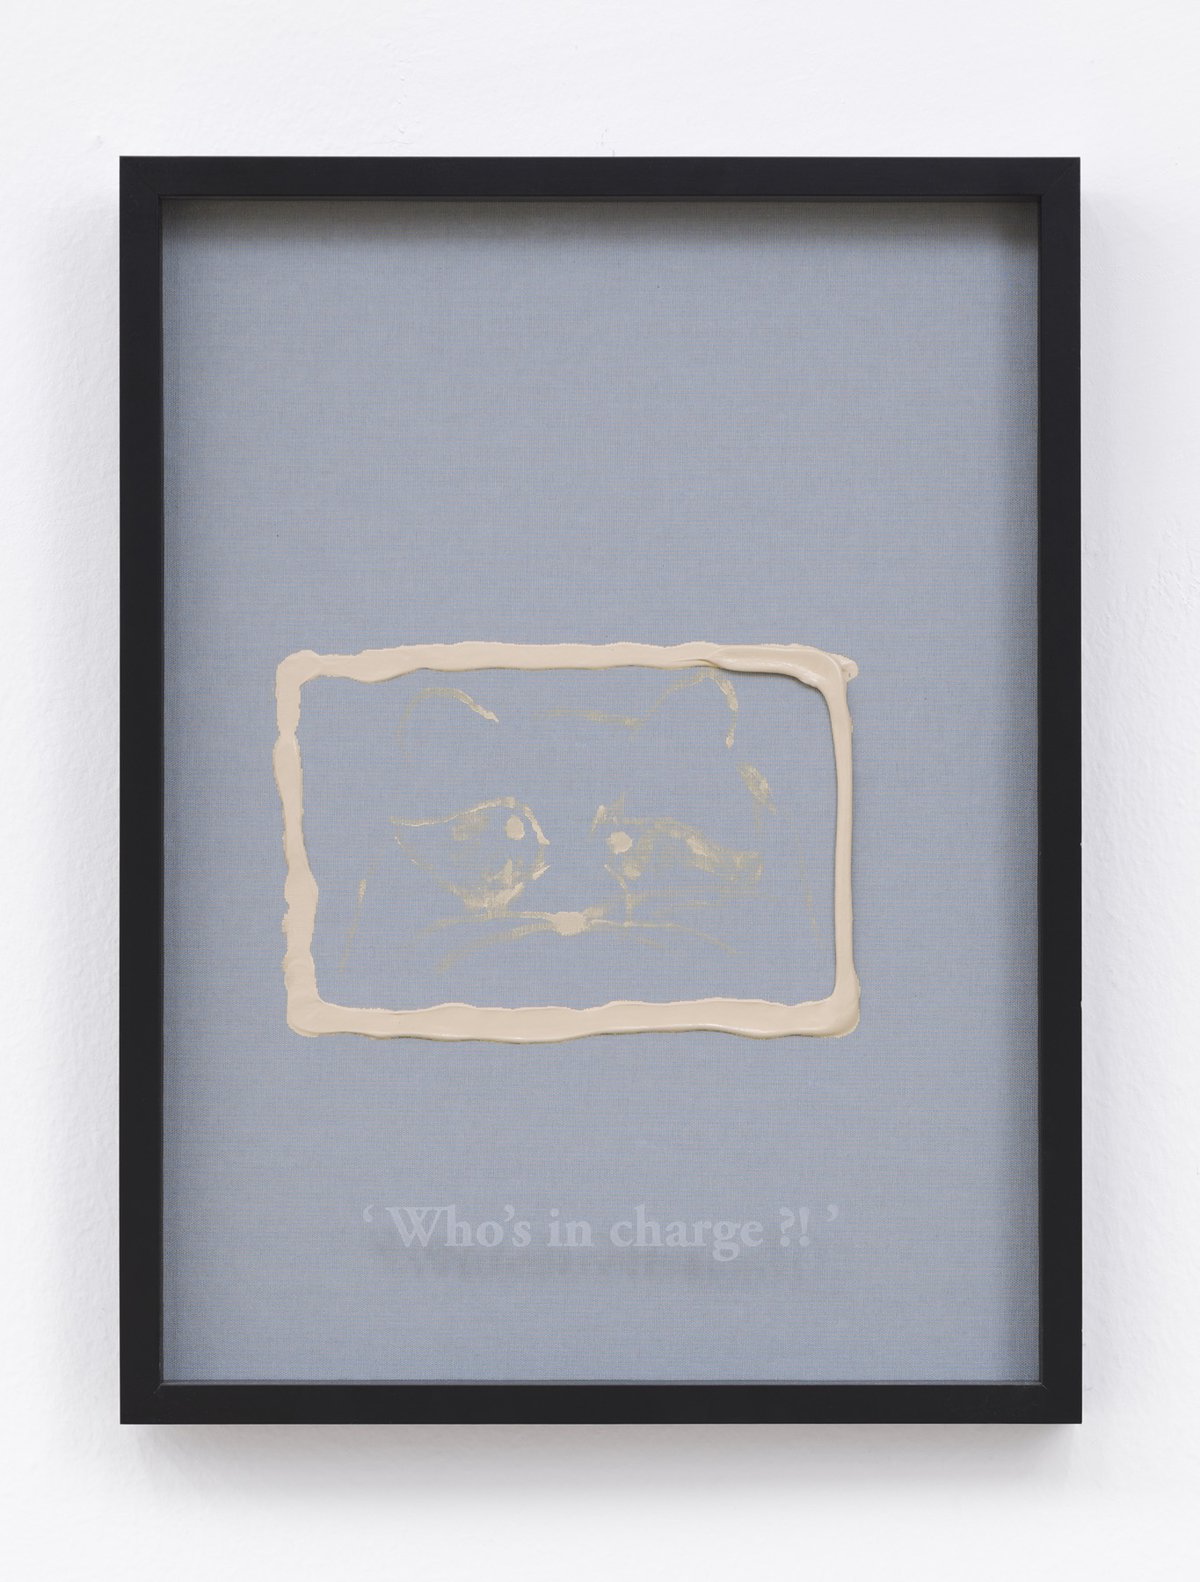 Philipp Timischl&quot;Who&#x27;s in charge?!&quot; (Light Grey/Unbleached Titanium), 2017Acrylic on linen and glass-engraved object frame40.1 x 32.1 cm